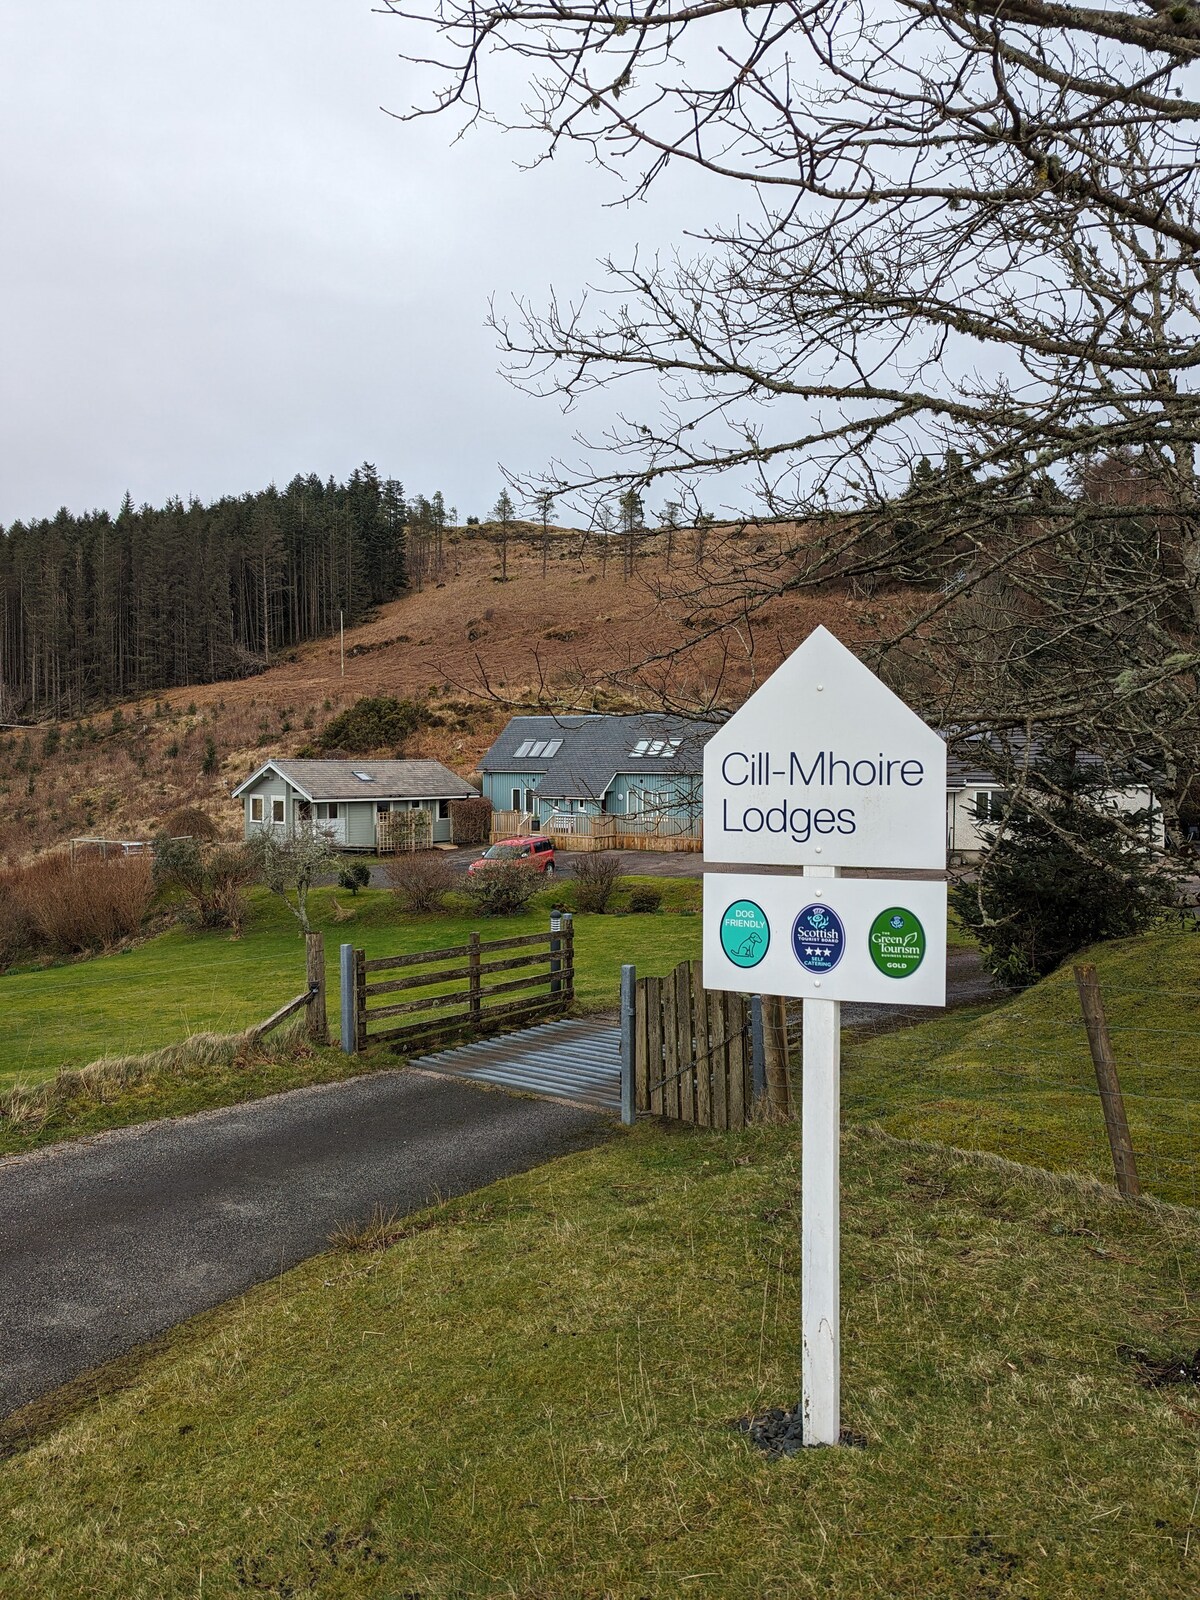 Willow Lodge, Cill Mhoire Lodges